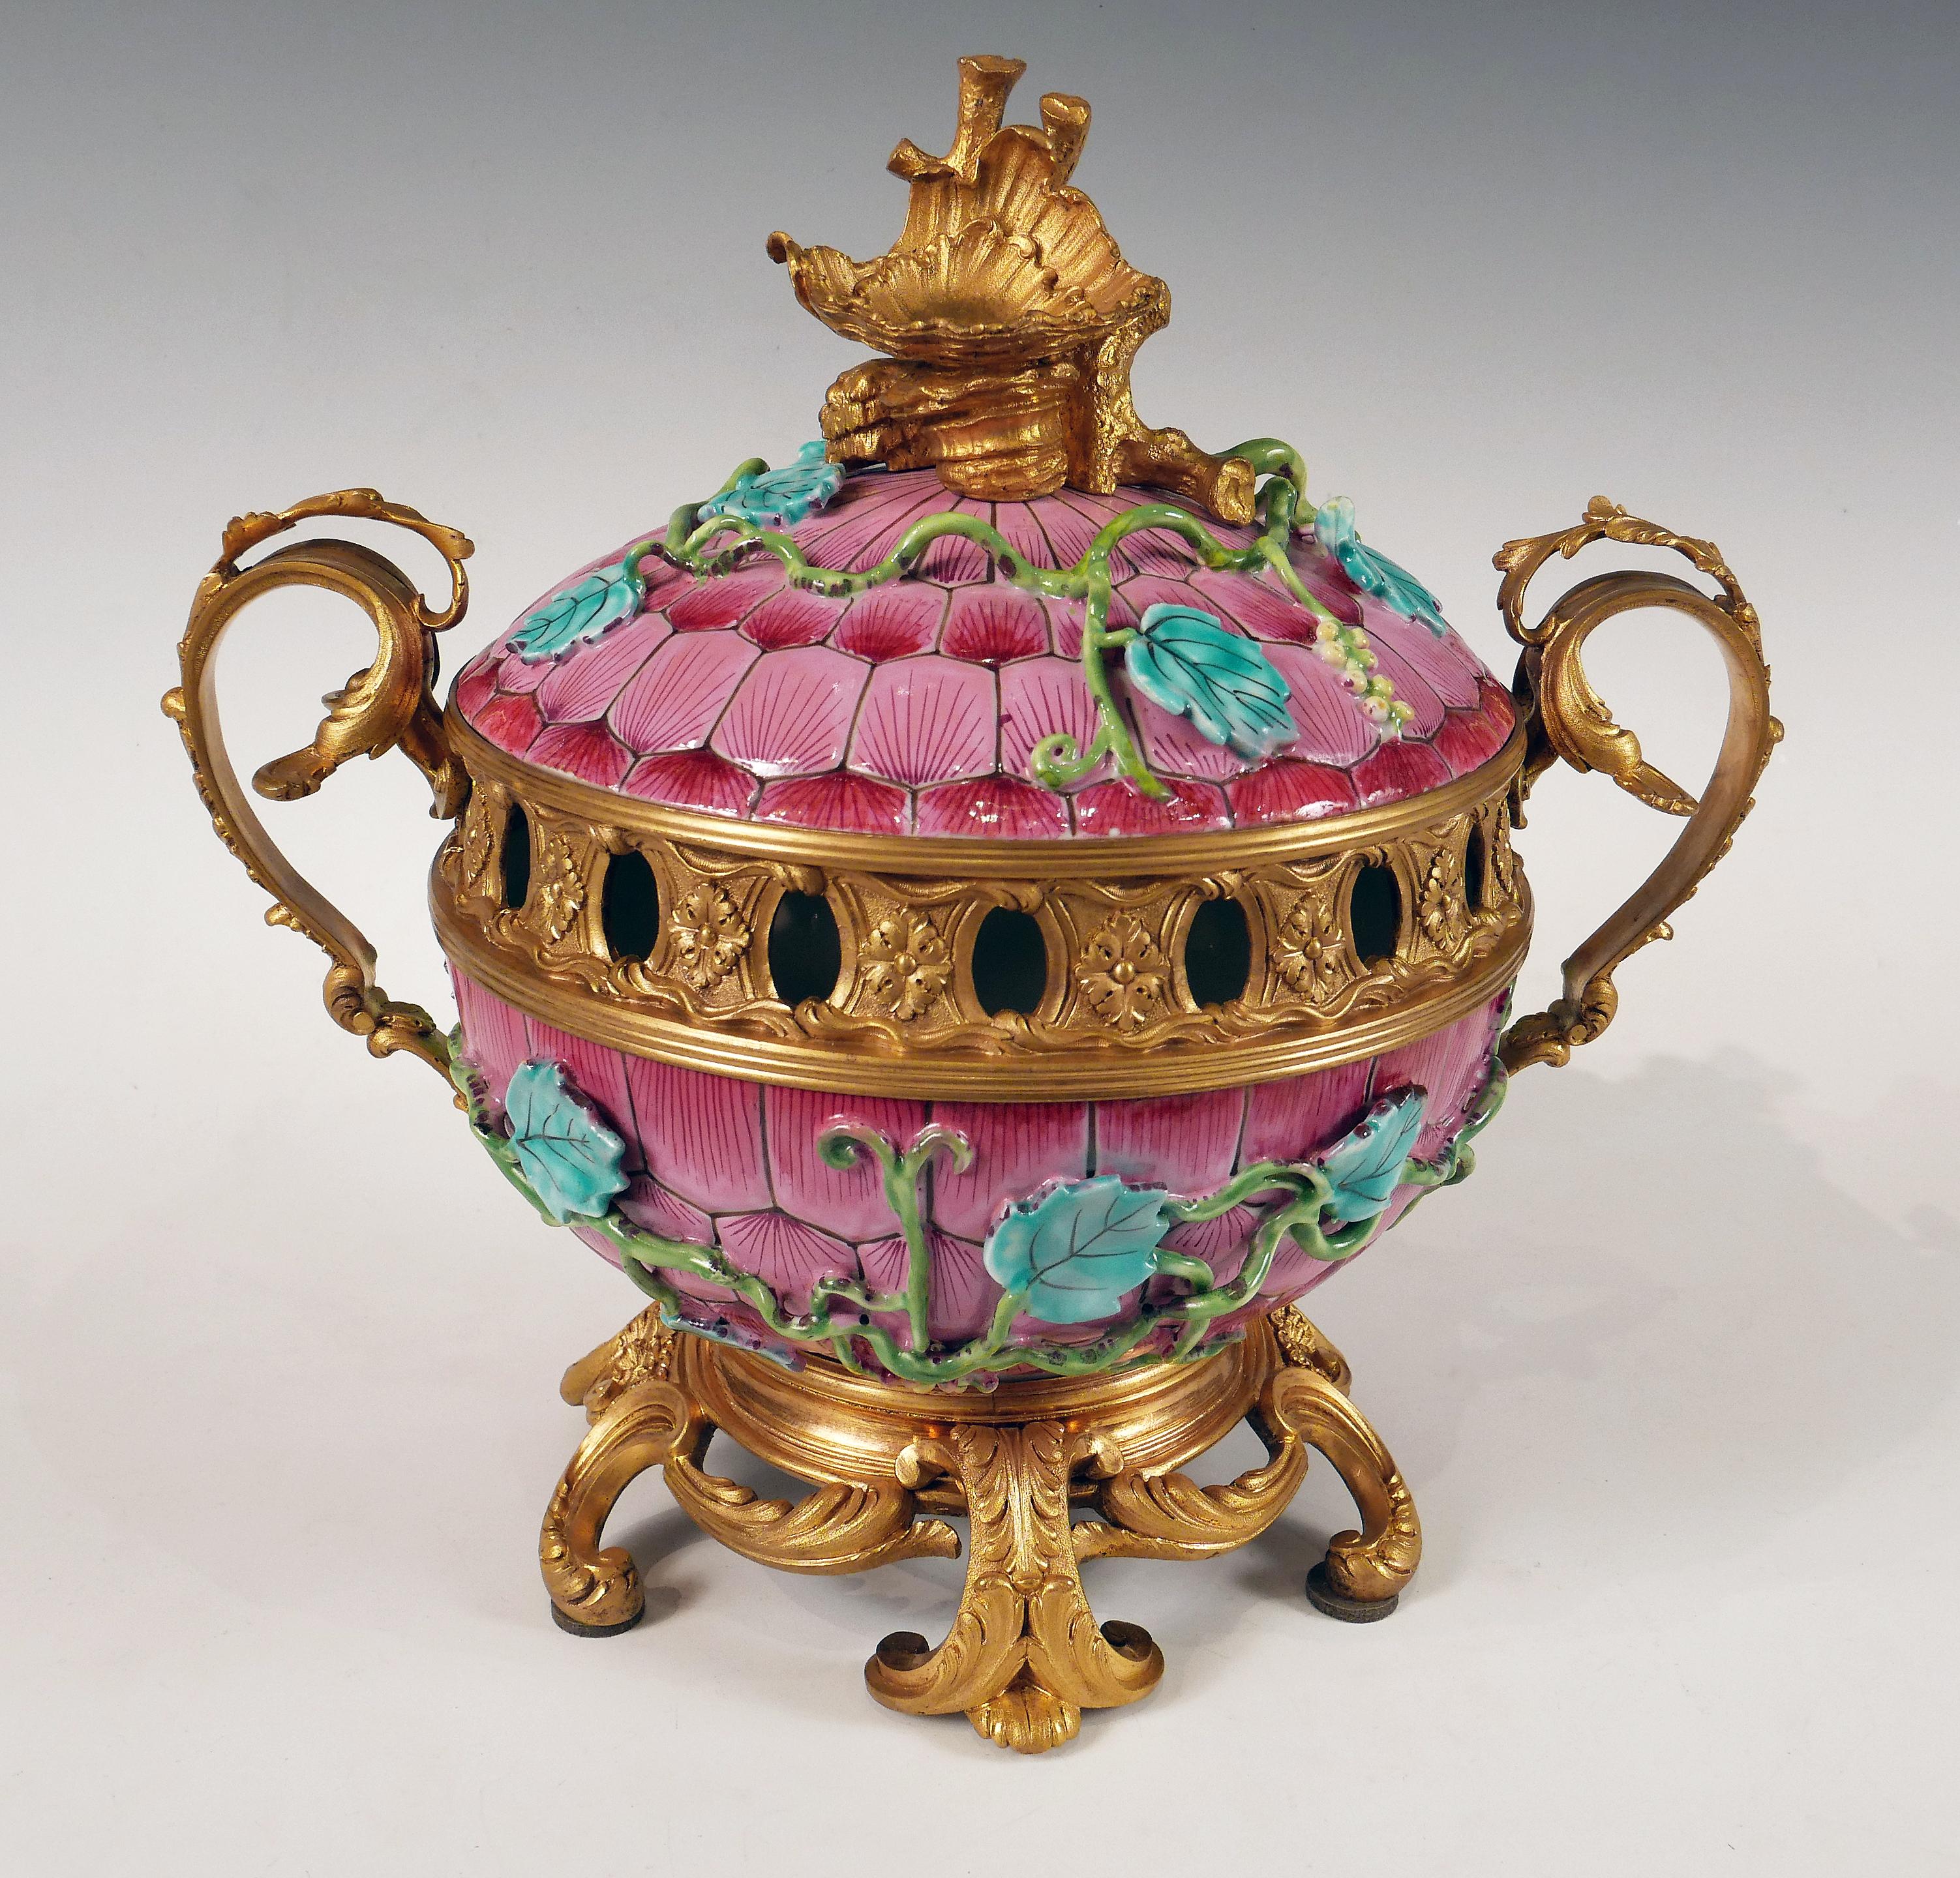 Large enamelled porcelain perfume burner decorated with vines on a background of rose petals. The set is embellished with an elegant mount in chiseled and gilded bronze formed by an openwork gallery on the collar, windings and foliage forming the